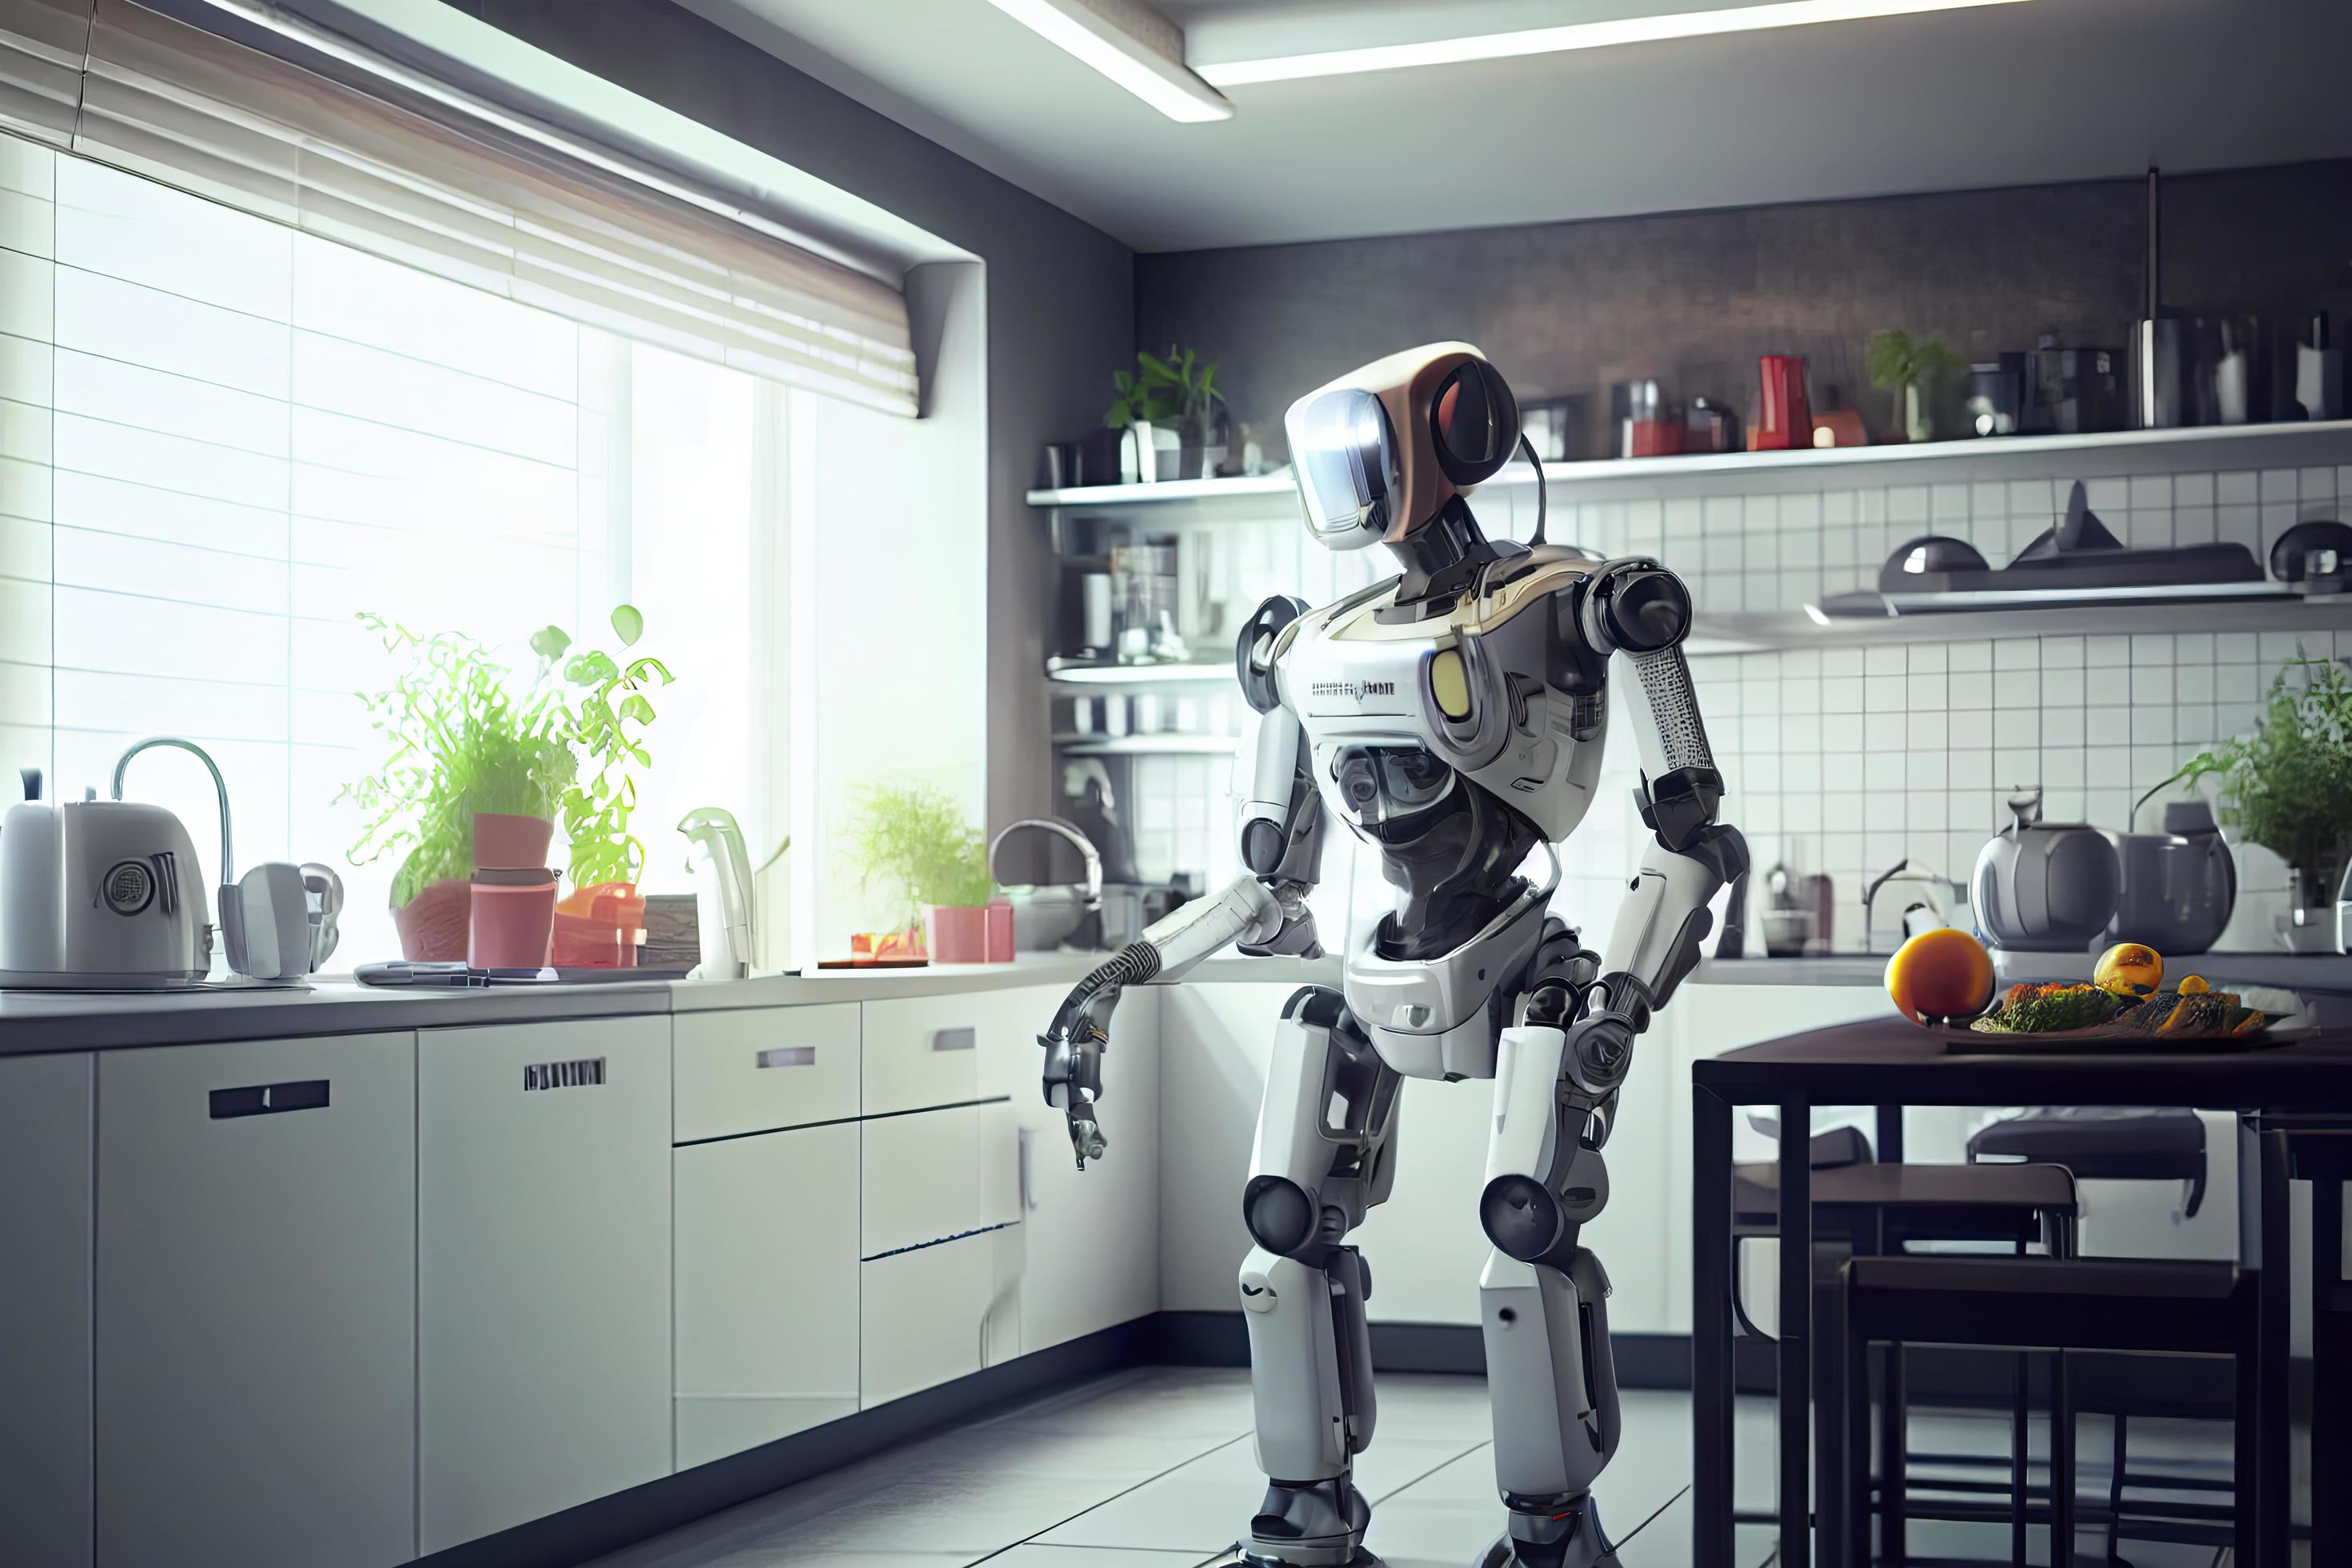 https://static.vecteezy.com/system/resources/previews/021/825/783/large_2x/robot-chef-cooking-in-kitchen-of-future-home-genius-smart-robot-working-in-modern-house-free-photo.jpg